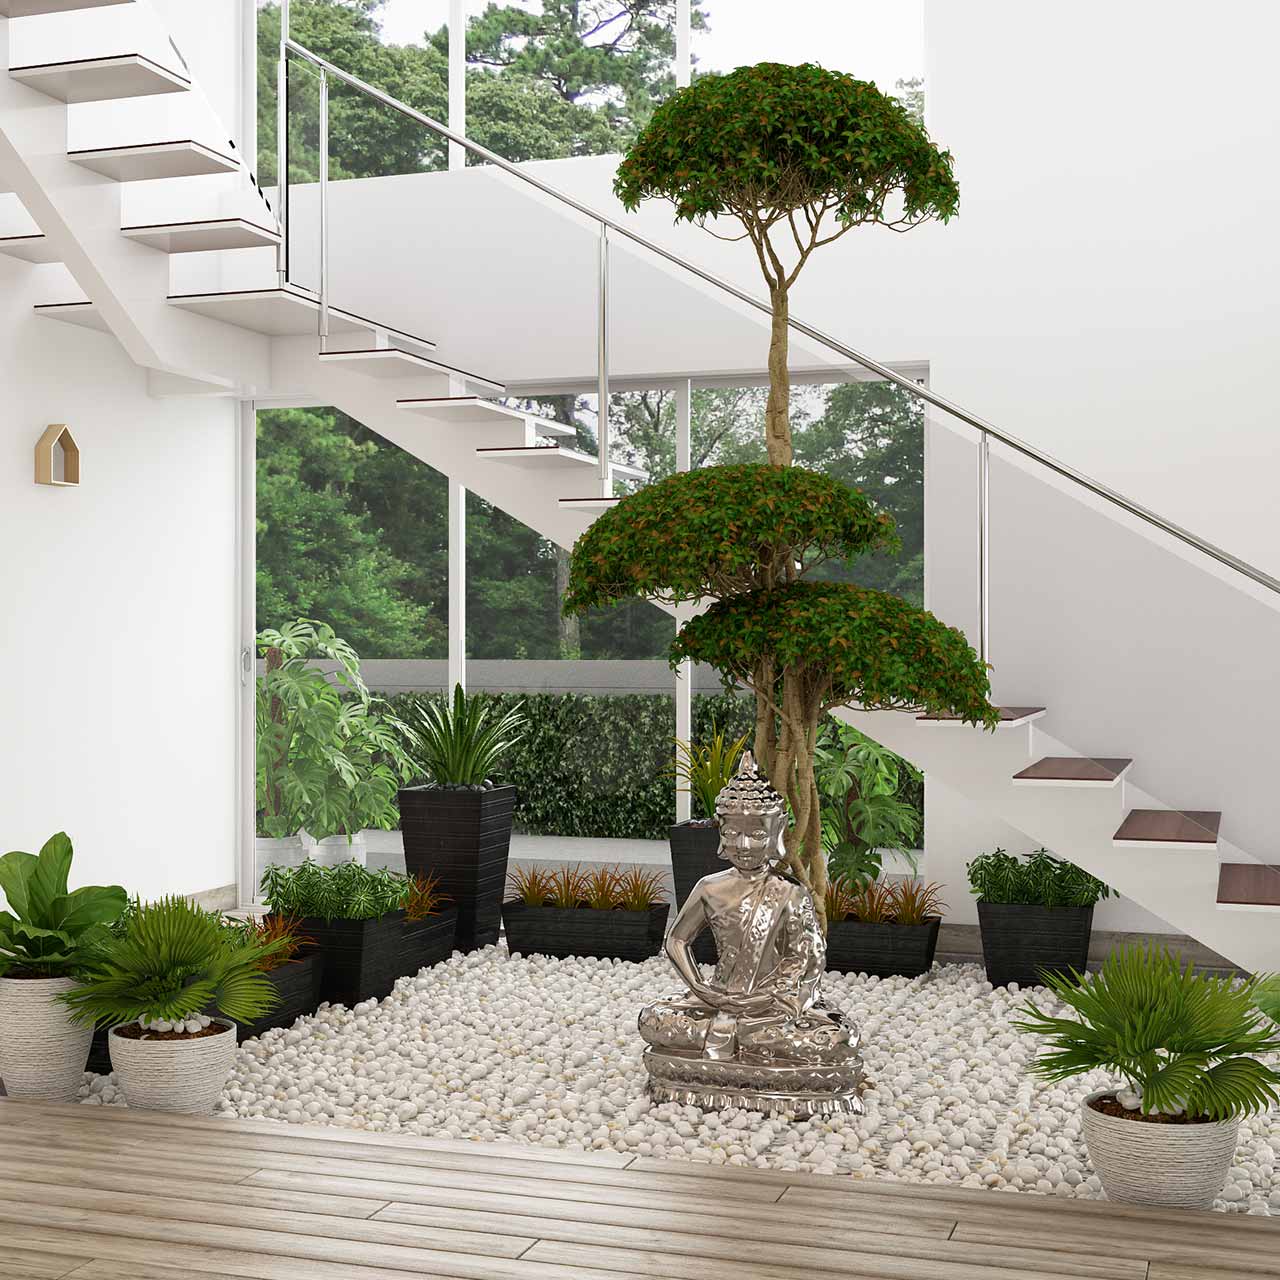 Living room interiors with a vibrant natural plants will make your space lively